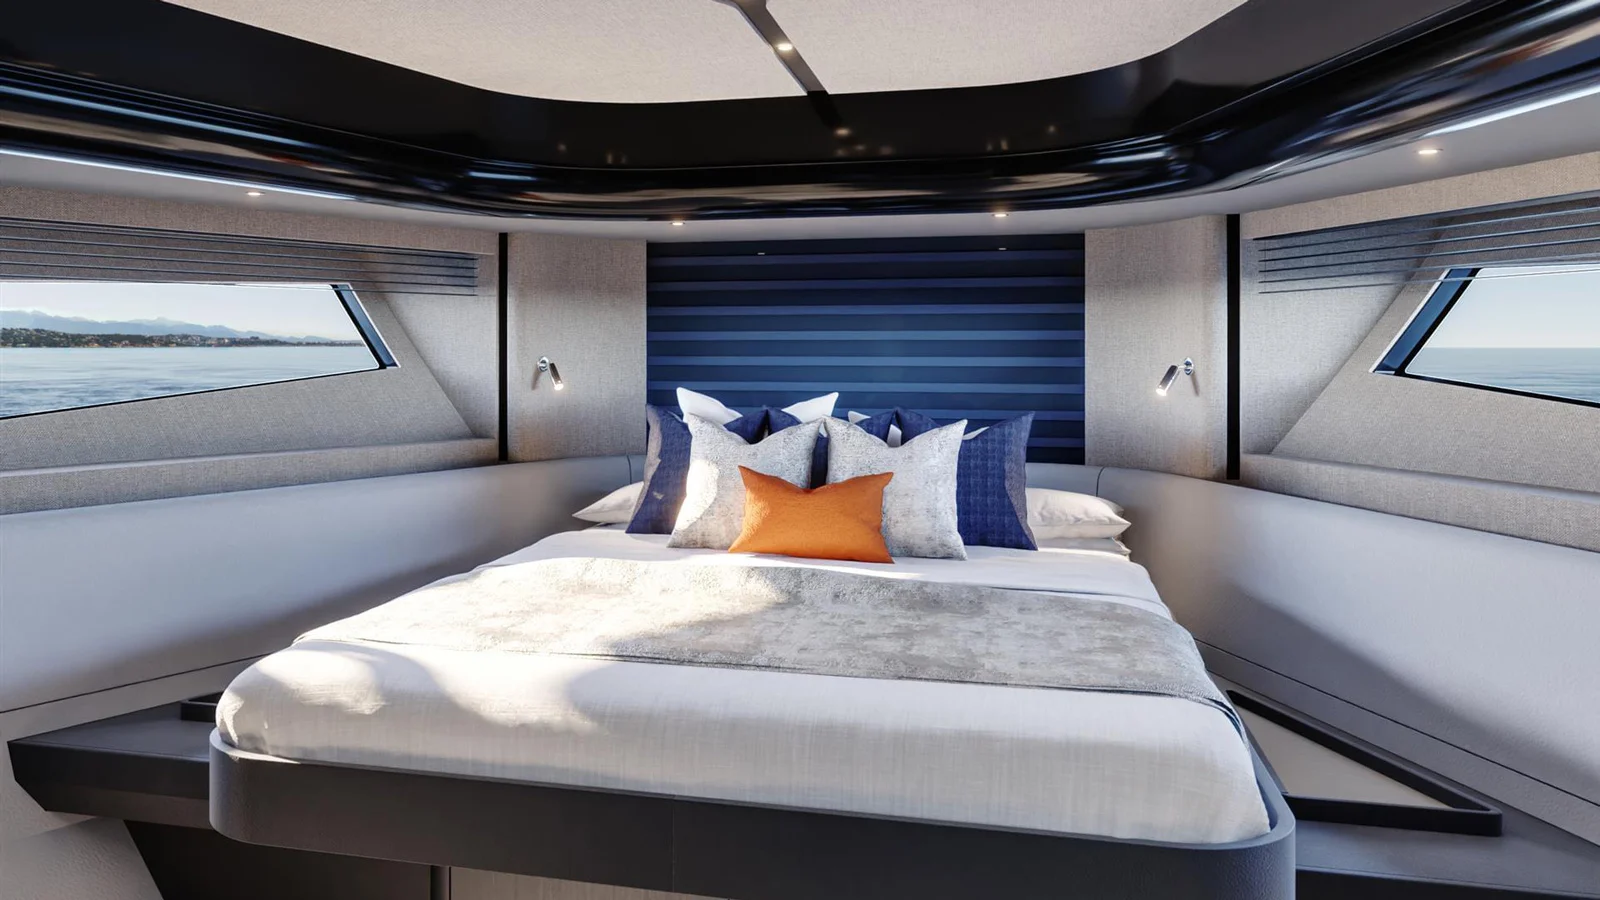 VIP cabin on the lower deck